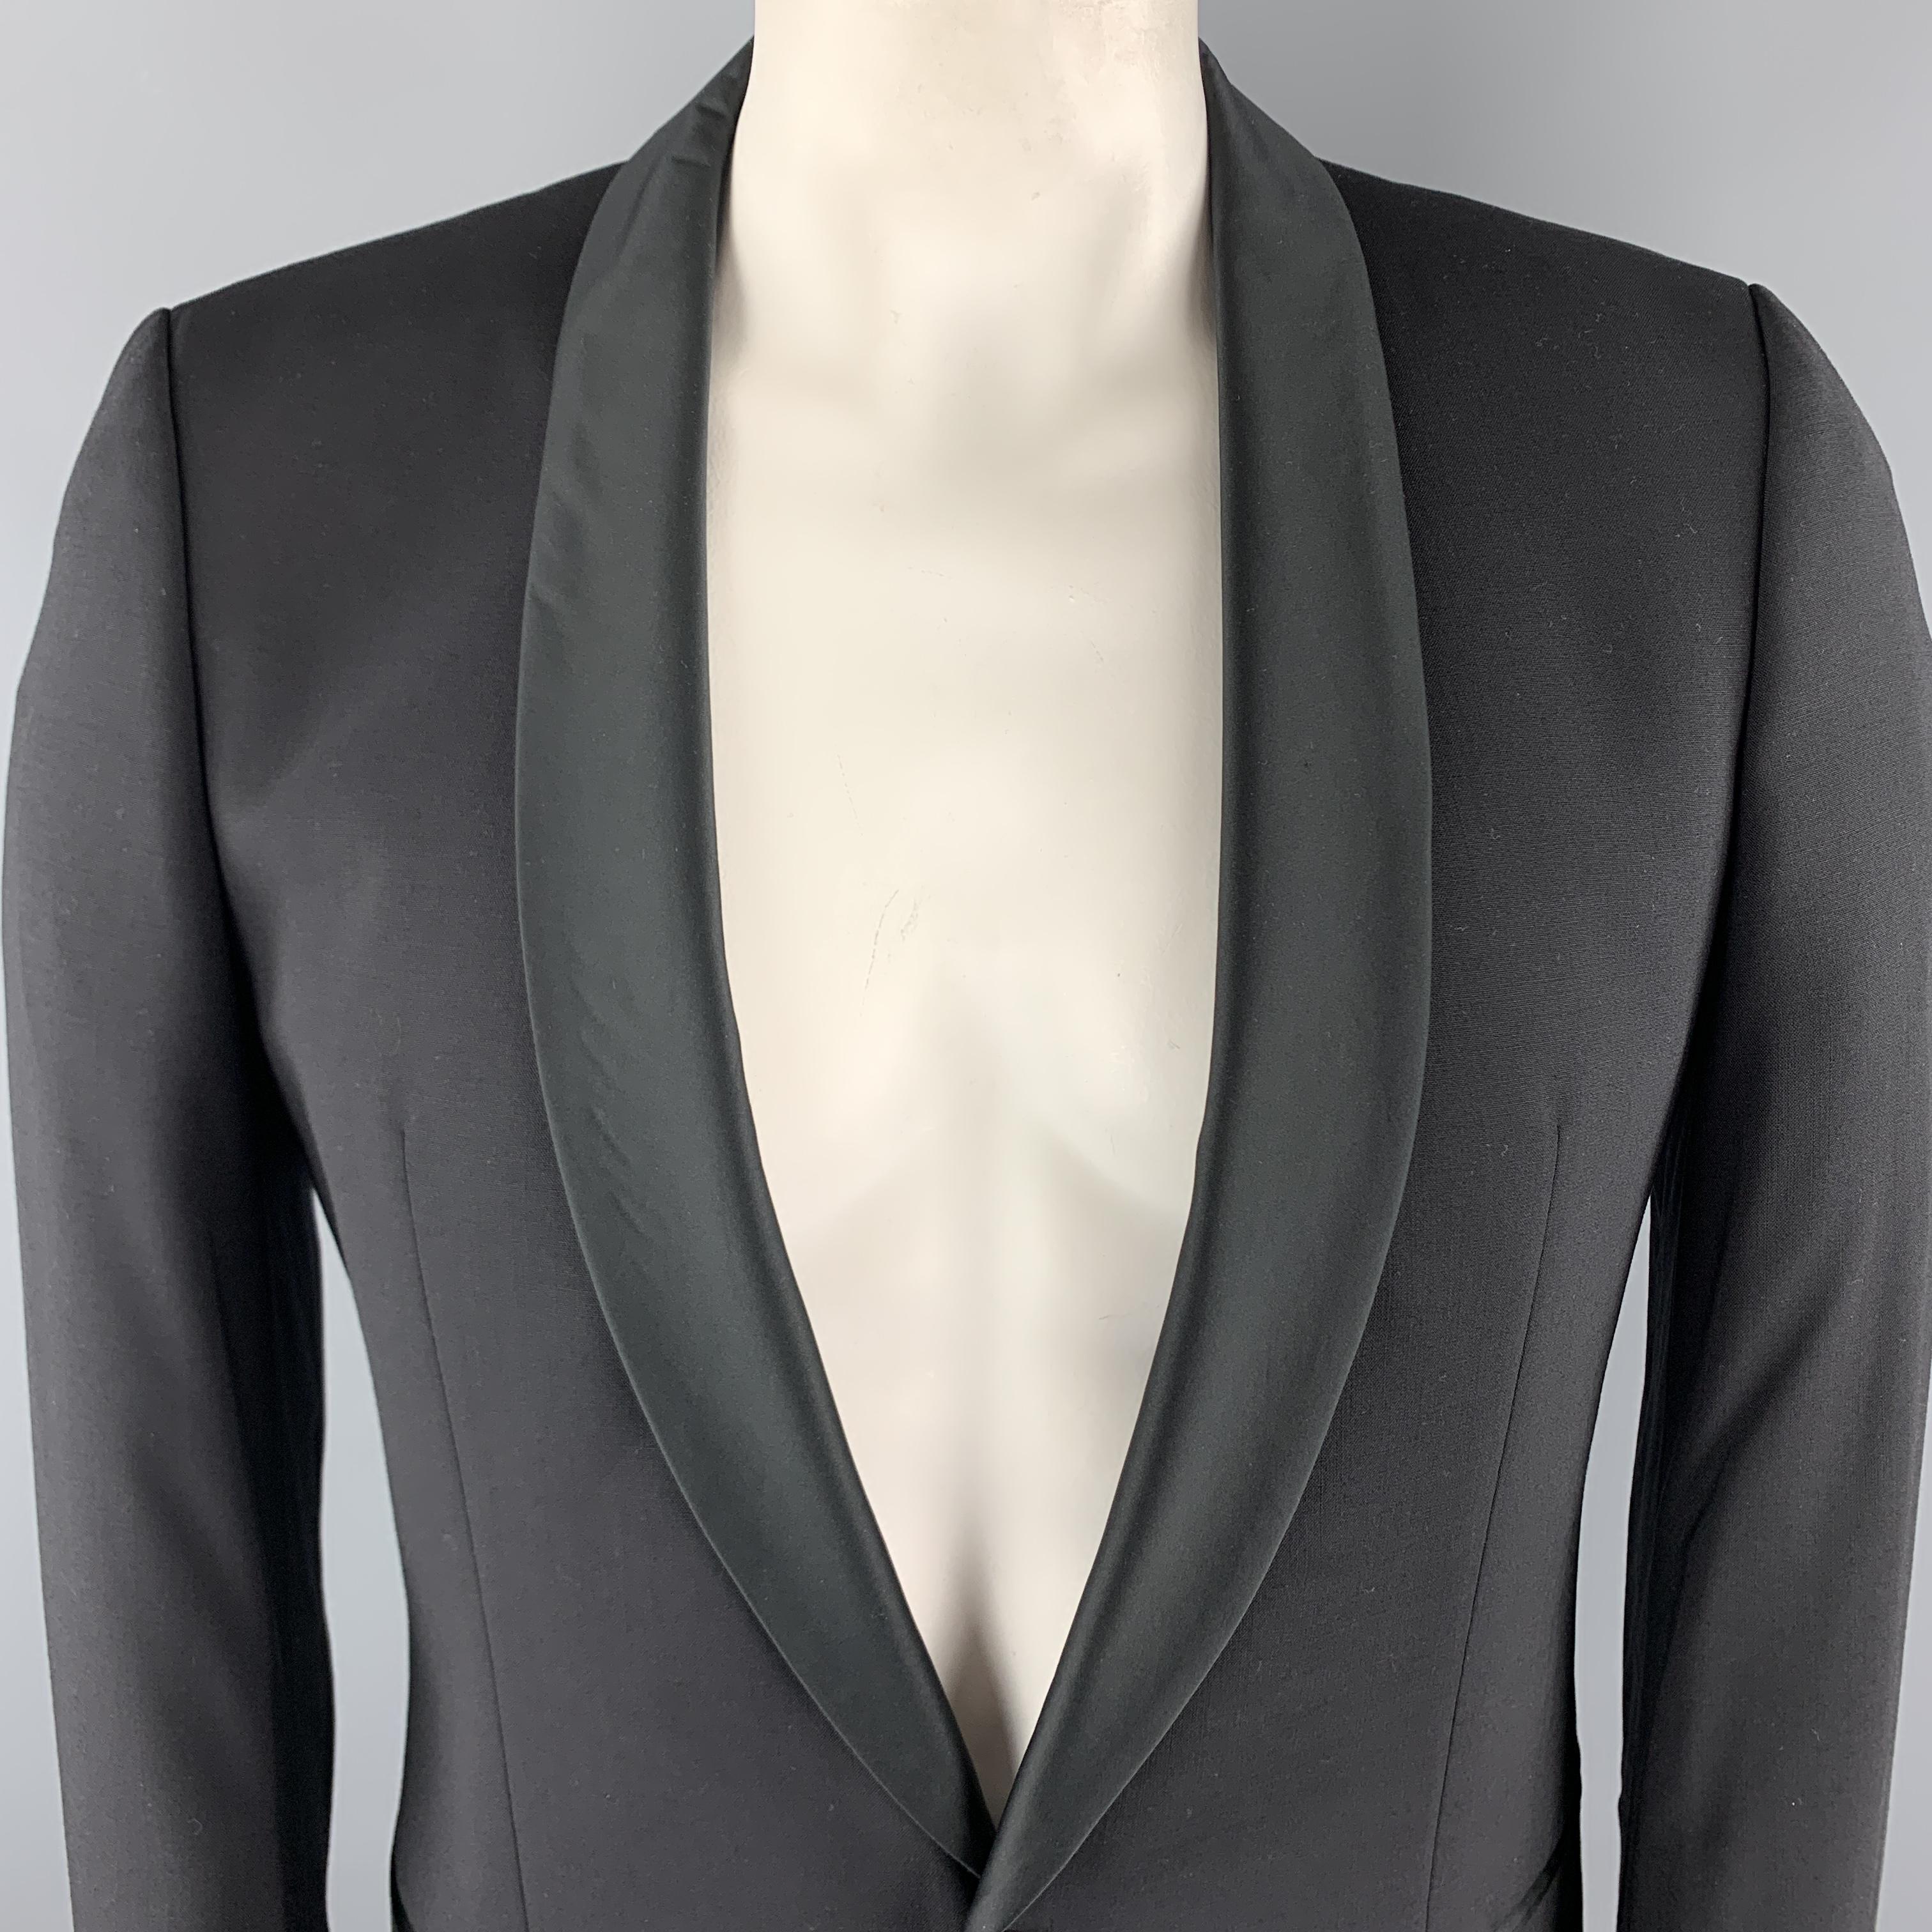 HUGO BOSS Tuxedo Jacket comes in a solid black wool material, with a shawl collar, slit pockets, a single button at closure, single breasted, a satin trim at cuffs, and a single vent at back.

Excellent Pre-Owned Condition.
Marked: 40